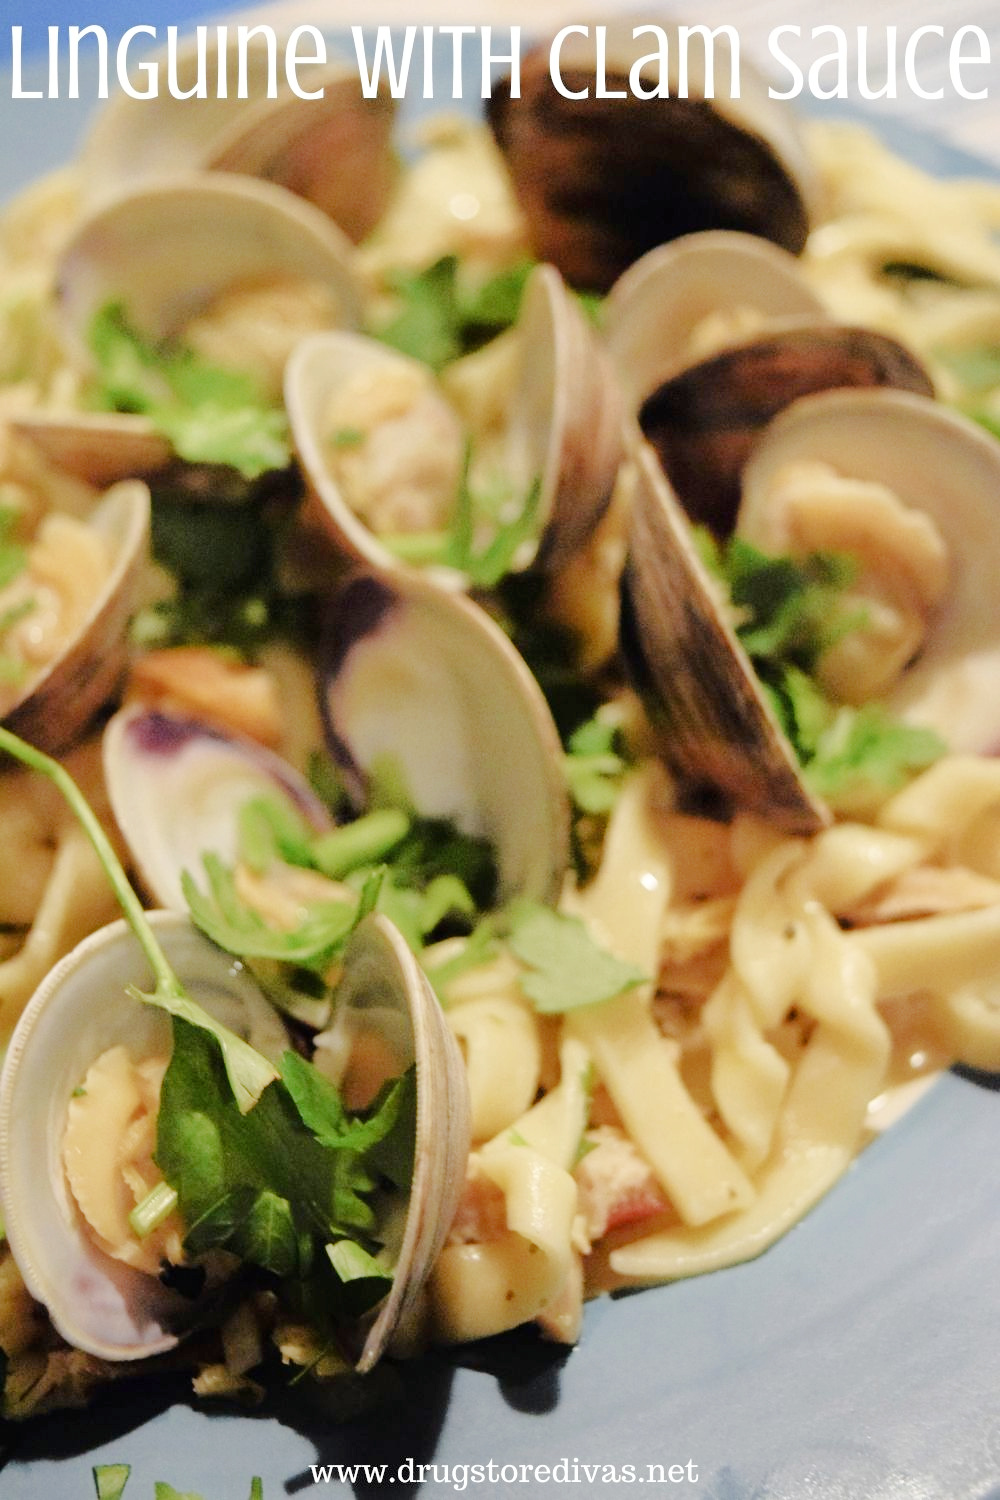 Two dozen clams, plus two cans of clams, make up this tasty linguine with clam sauce. Get tips about steaming clams in the post too.